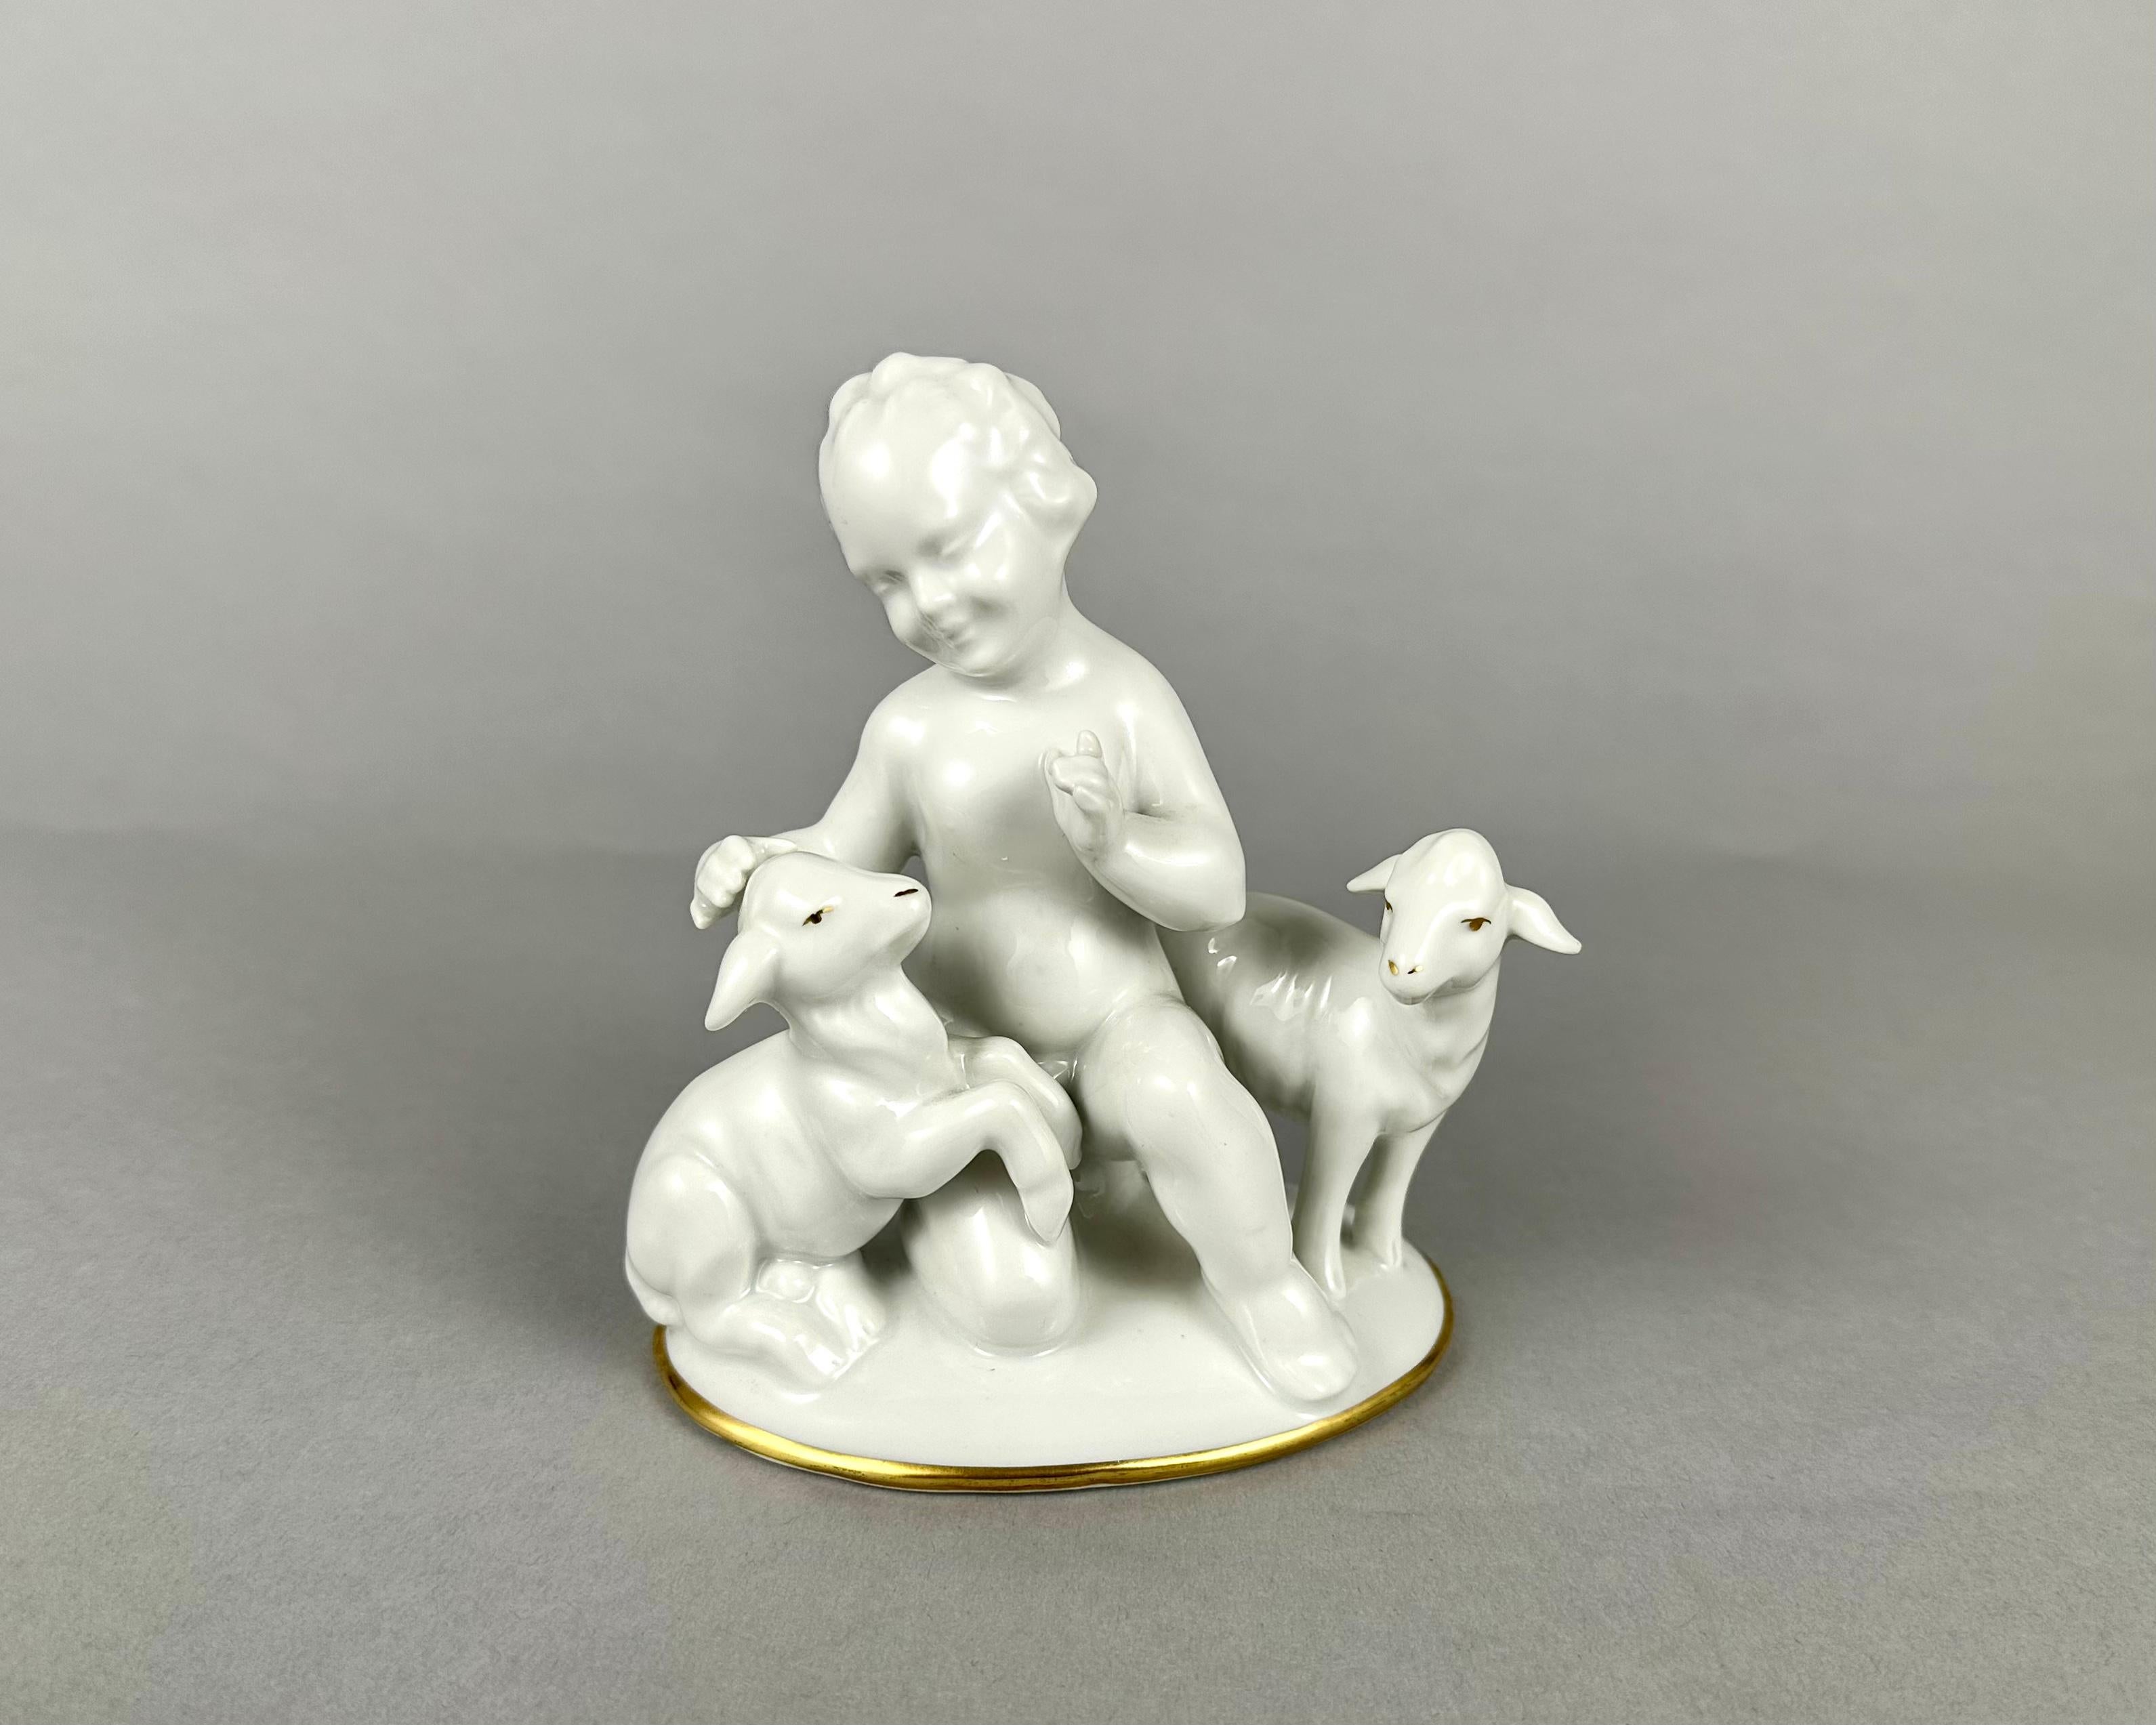 The highly detailed German Snow White porcelain figurine Putti with lambs in gilding by GEROLD PORZELLAN - BAVARIA, 1960s.

Very rare and outstanding hard-to-find figurine. It has the finest detail.

Skillfully traced details, completely